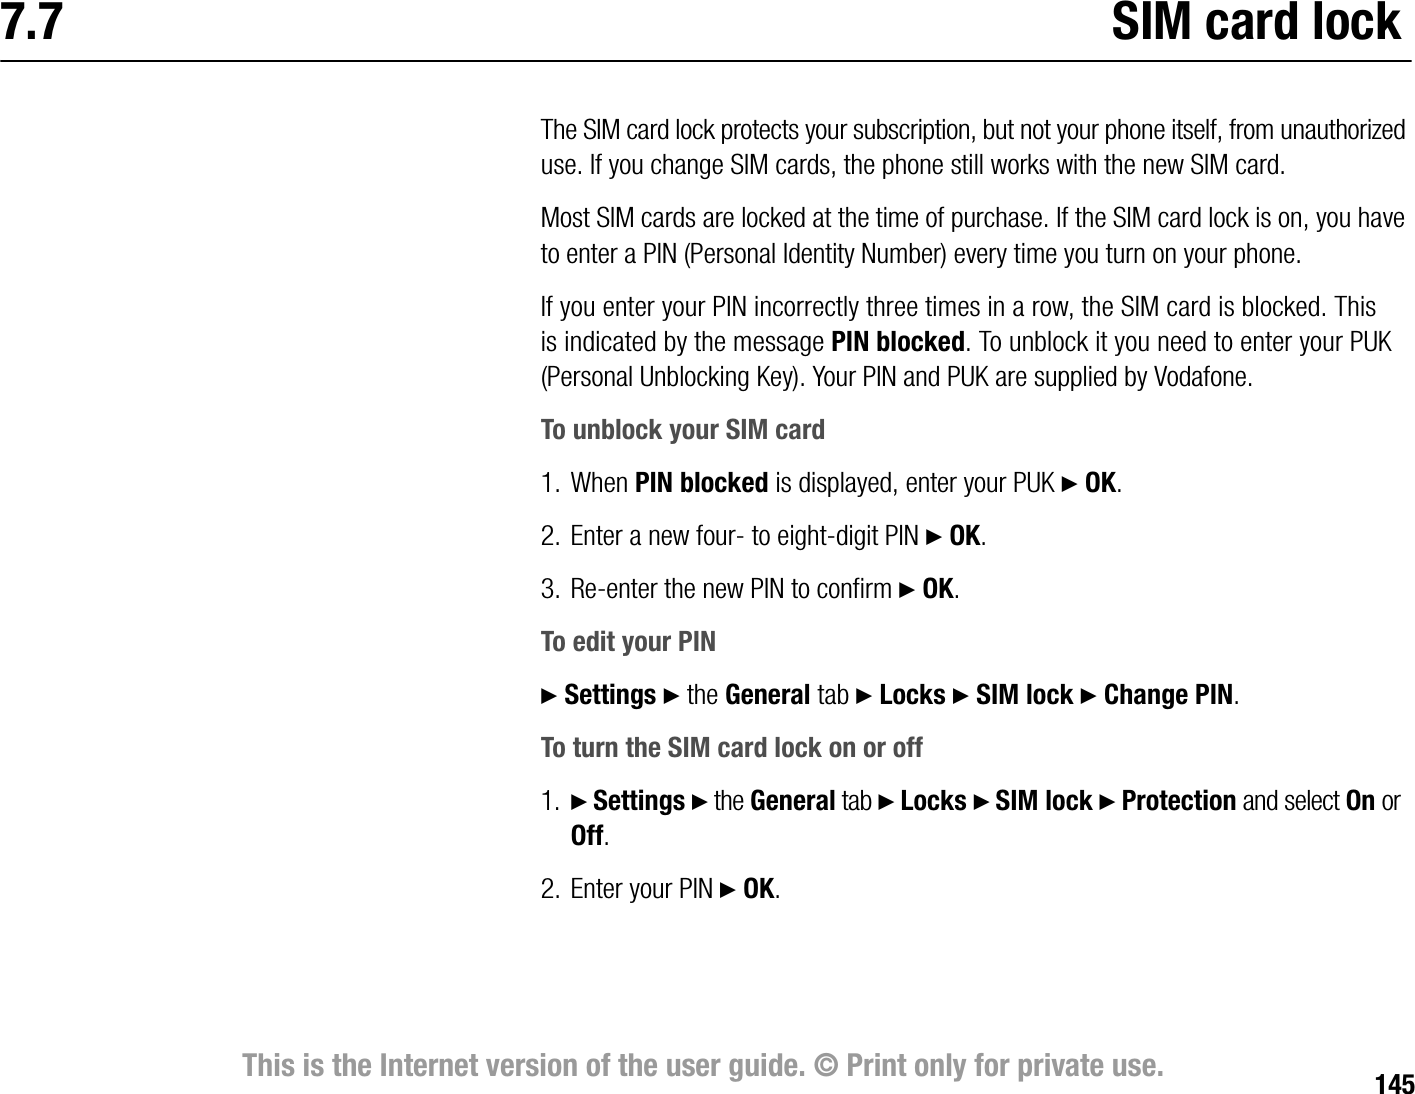 145This is the Internet version of the user guide. © Print only for private use.7.7 SIM card lockThe SIM card lock protects your subscription, but not your phone itself, from unauthorized use. If you change SIM cards, the phone still works with the new SIM card.Most SIM cards are locked at the time of purchase. If the SIM card lock is on, you have to enter a PIN (Personal Identity Number) every time you turn on your phone.If you enter your PIN incorrectly three times in a row, the SIM card is blocked. This is indicated by the message PIN blocked. To unblock it you need to enter your PUK (Personal Unblocking Key). Your PIN and PUK are supplied by Vodafone.To unblock your SIM card1. When PIN blocked is displayed, enter your PUK } OK.2. Enter a new four to eightdigit PIN } OK.3. Reenter the new PIN to confirm } OK.To edit your PIN} Settings } the General tab } Locks } SIM lock } Change PIN.To turn the SIM card lock on or off1. } Settings } the General tab } Locks } SIM lock } Protection and select On or Off.2. Enter your PIN } OK.